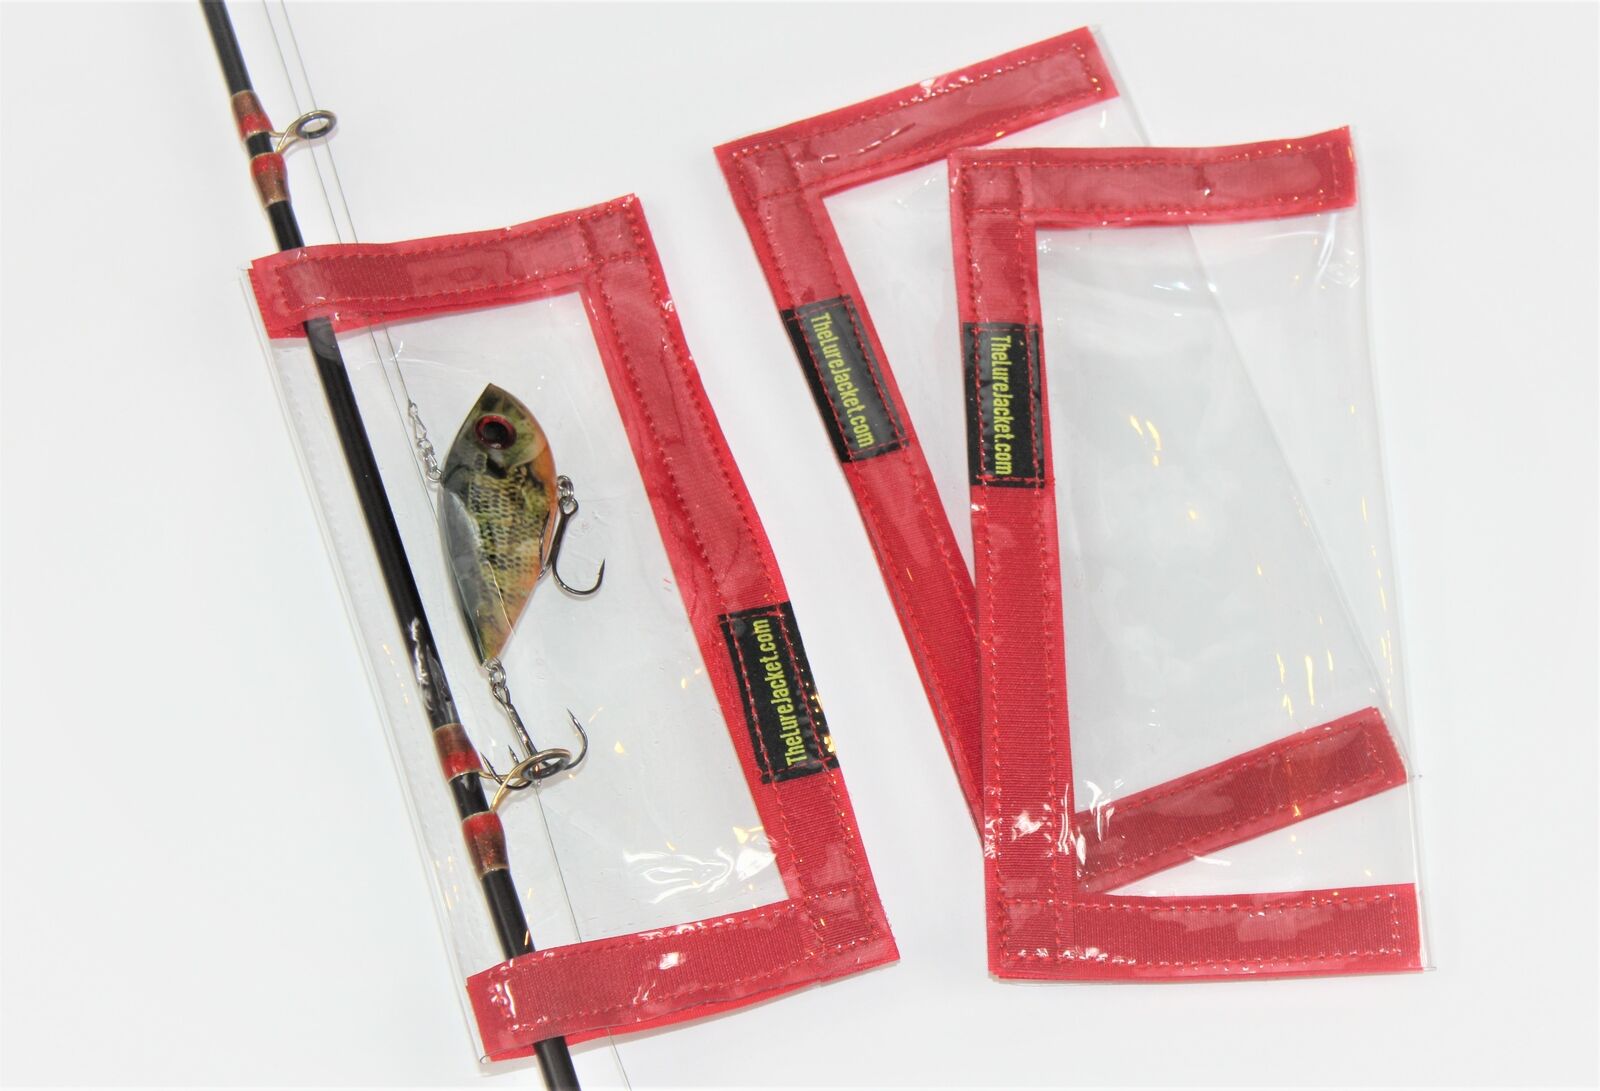 Lure Jacket Angler 8" X 8" - 3-pack With 7 Color Options; Fishing Lure Wrap, Lur